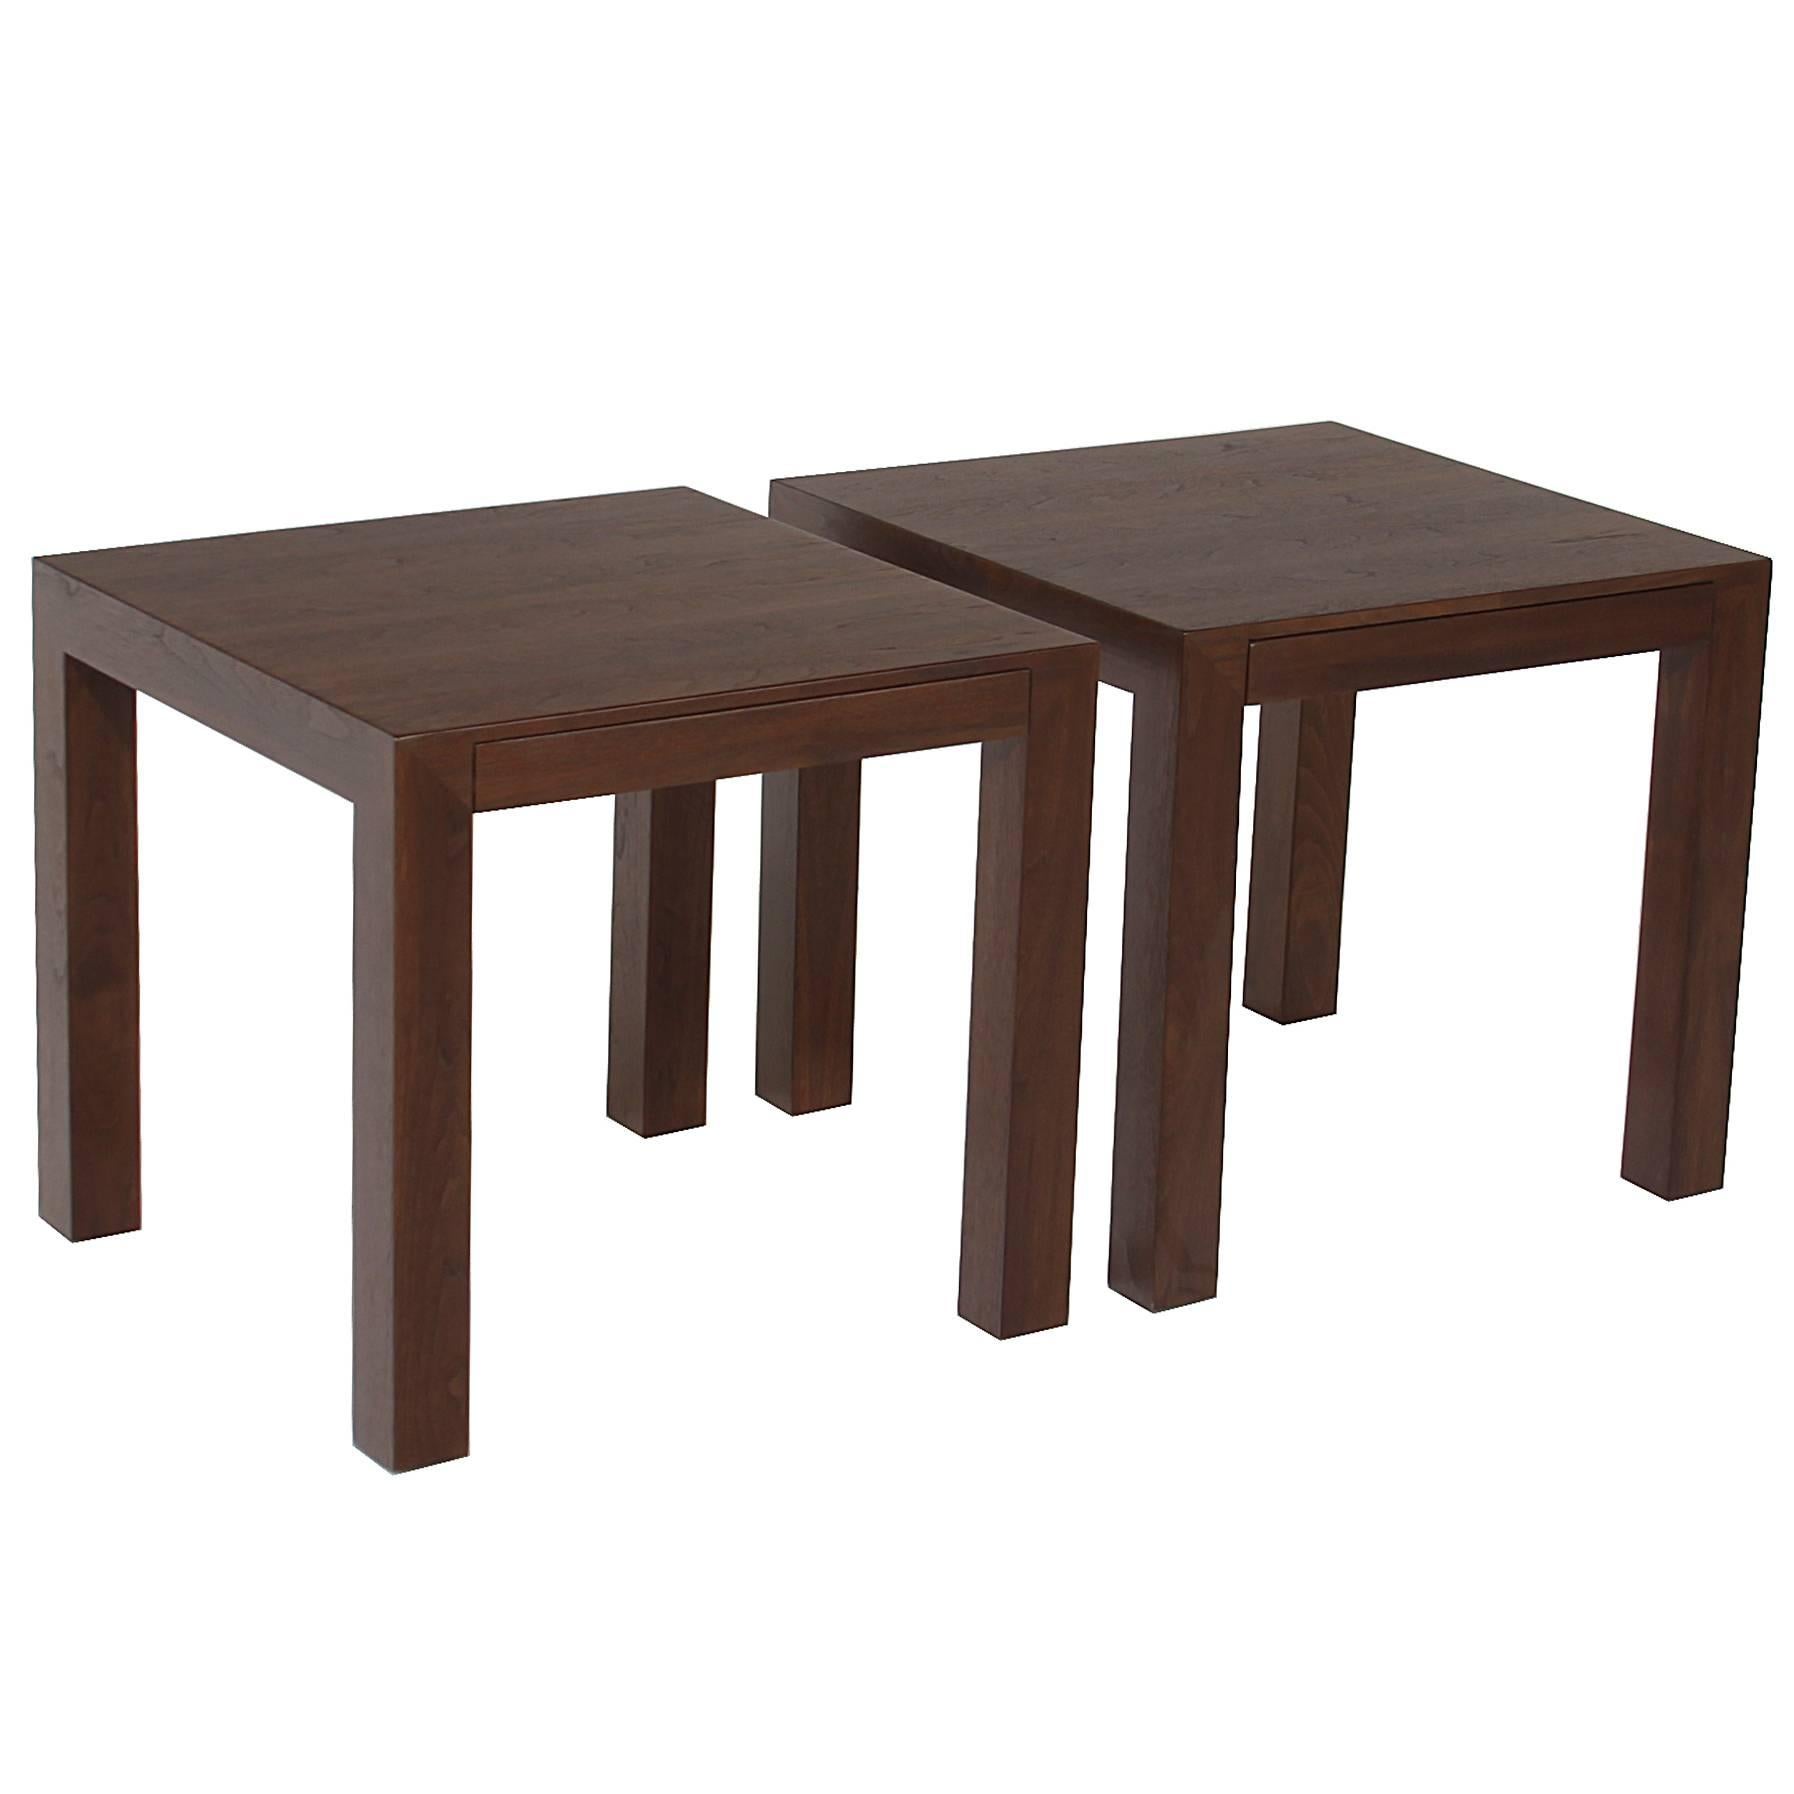 Pair of Minimal Walnut Side Tables with Drawers